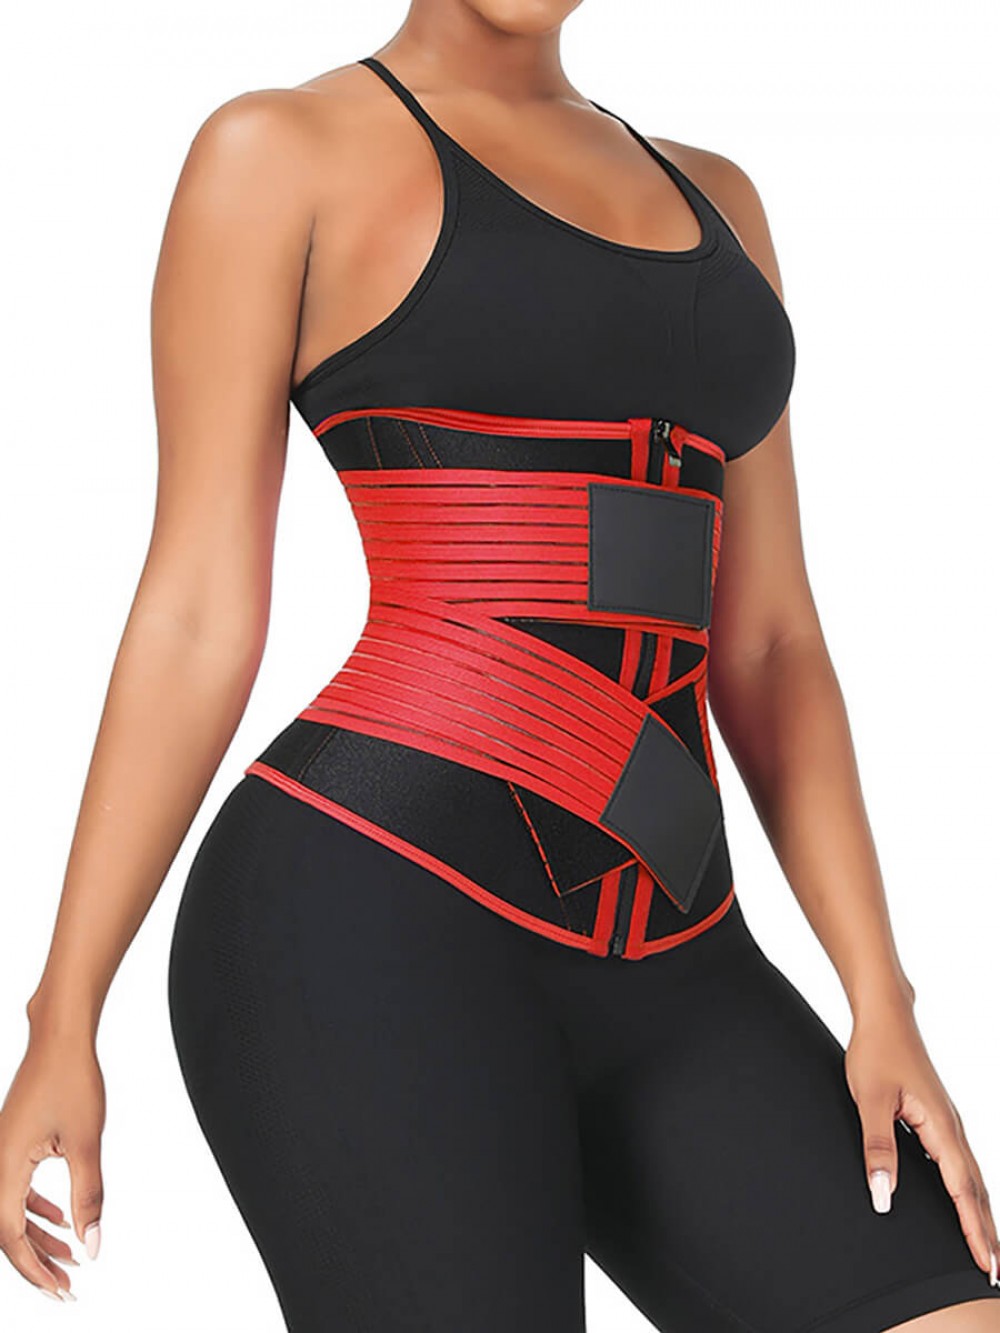 Red Neoprene 3-Layer Tummy Slim With 10 Steel Bones Wrap For Gym